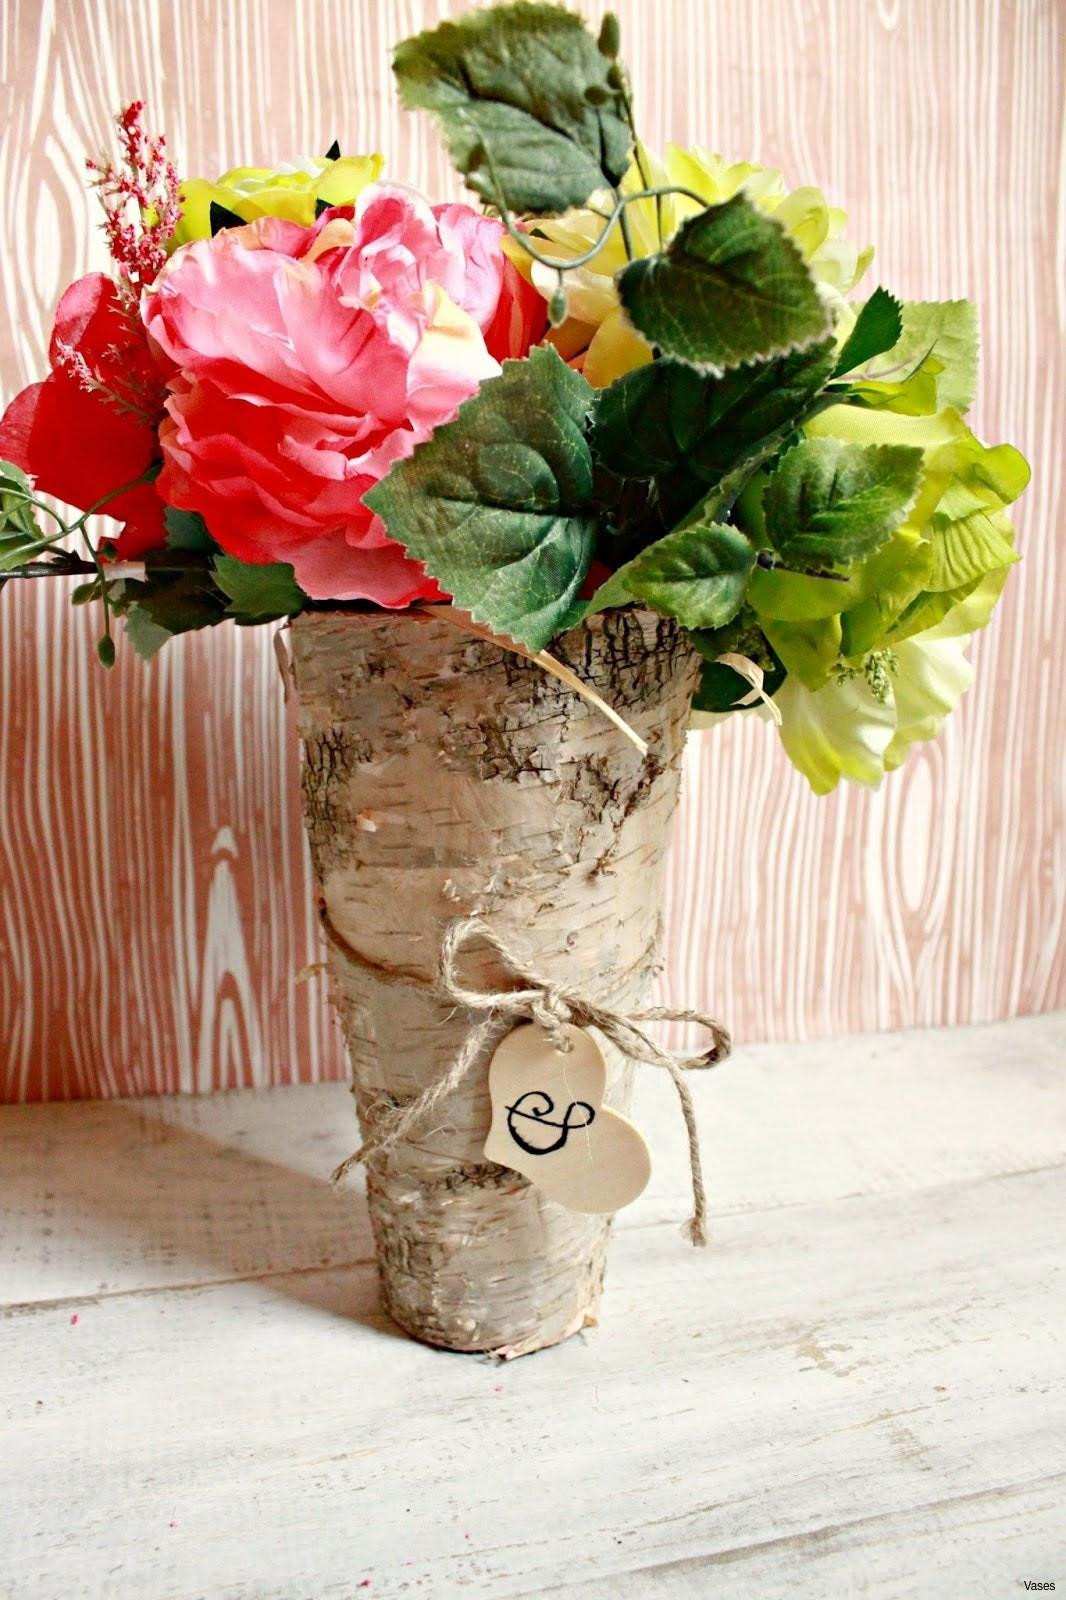 12 Perfect Hurricane Vases for Centerpieces 2022 free download hurricane vases for centerpieces of more diy wedding ideas on a budget amazing design economyinnbeebe com throughout flowers and decorations for weddings h vases diy wood vase i 0d base insp